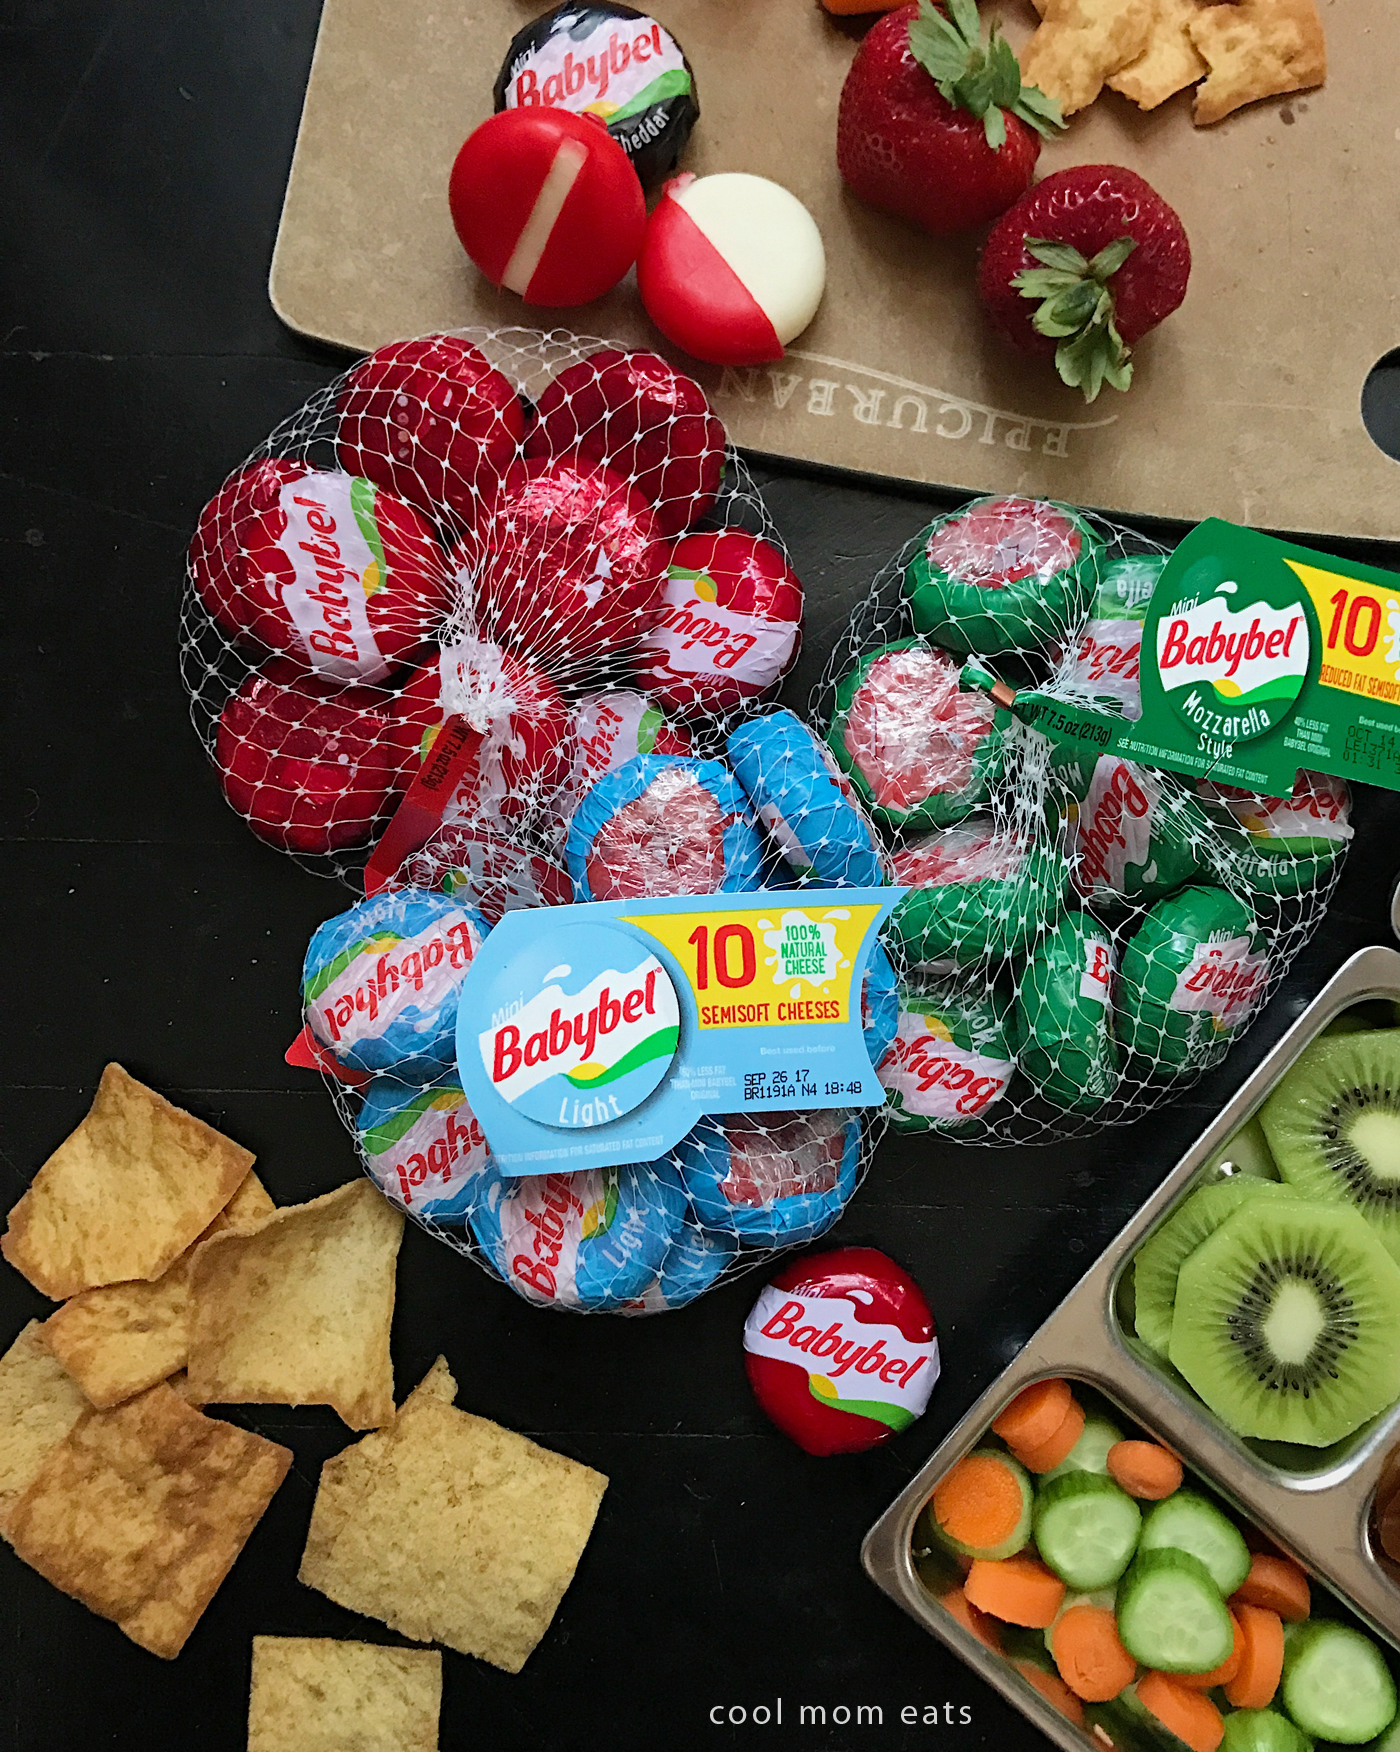 Fun lunchbox ideas to make school lunch more interesting for the kids -- and you too! -- with Mini Babybel | Cool Mom Eats [sponsor]